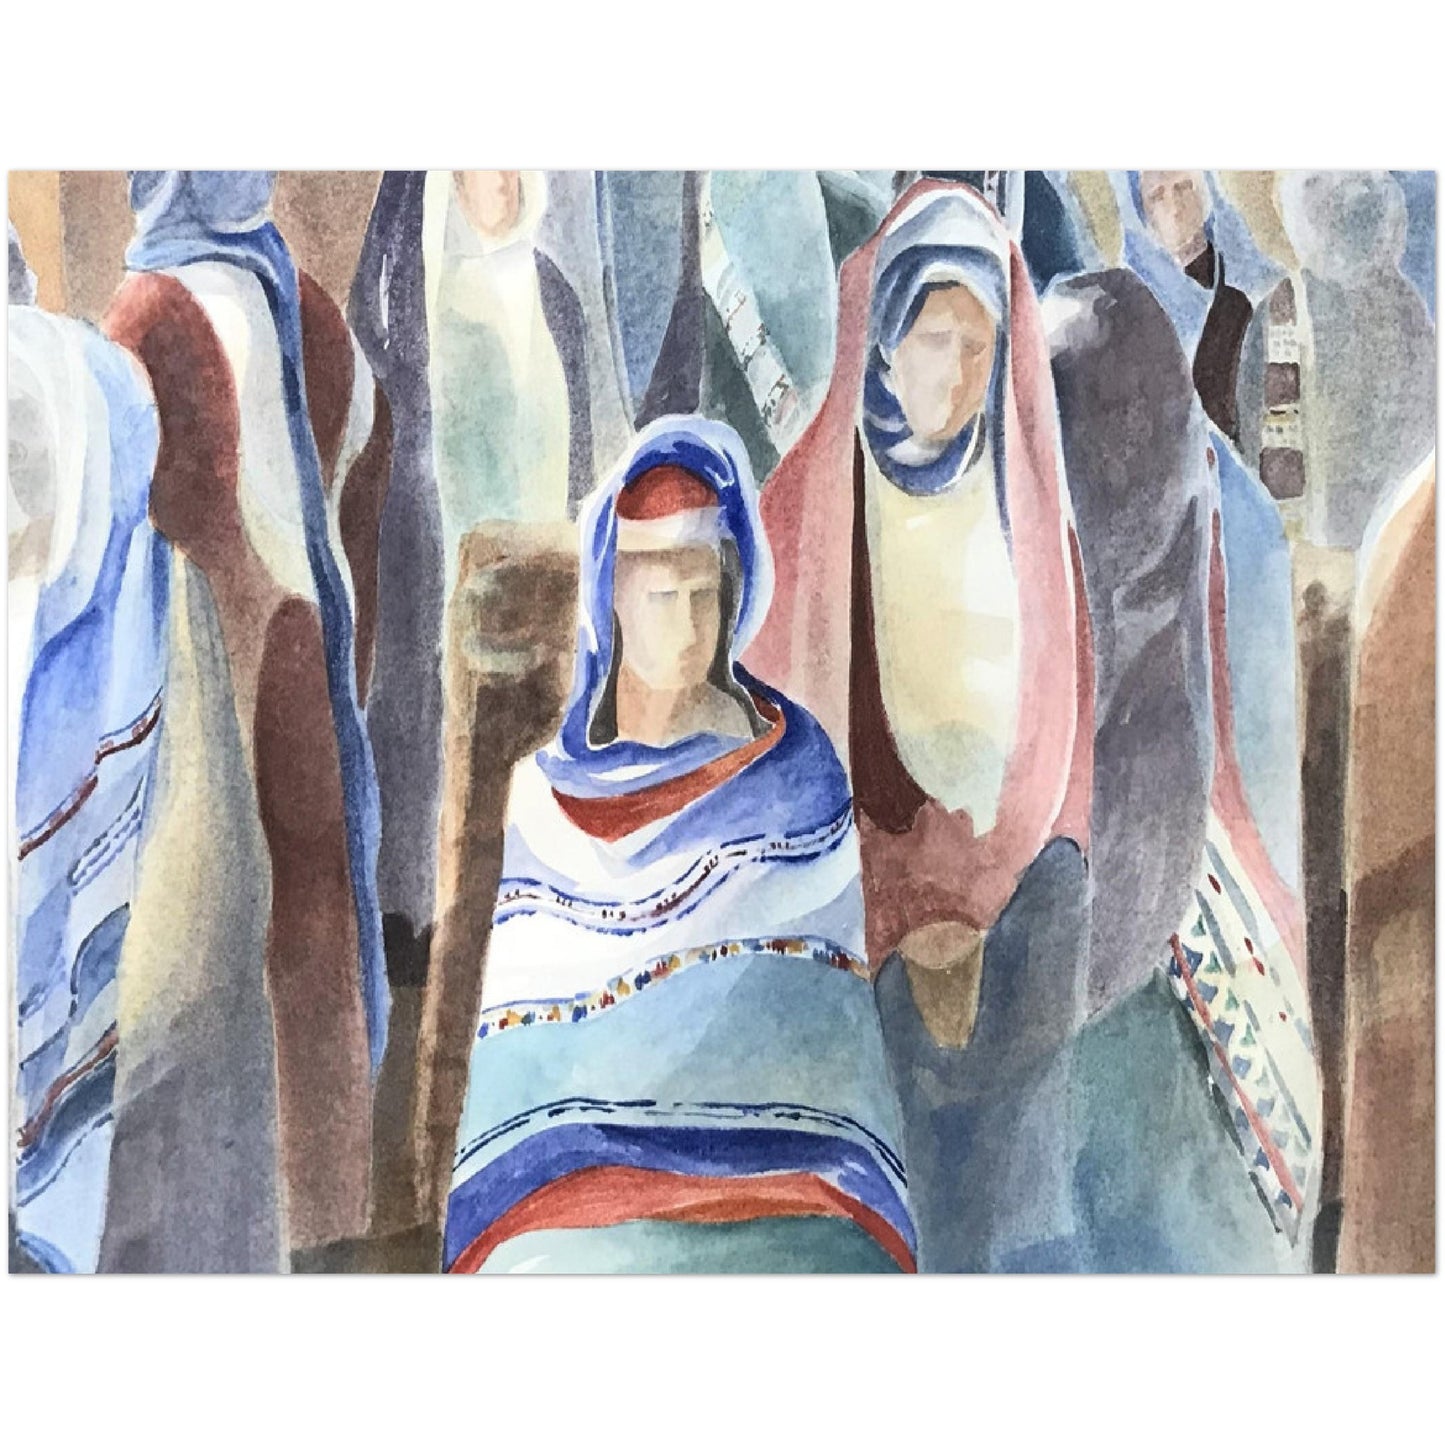 Pack of 10 Postcards "Pueblo People Watercolor" (2-sided, No envelopes, US & CA) by Barbara Cleary Designs